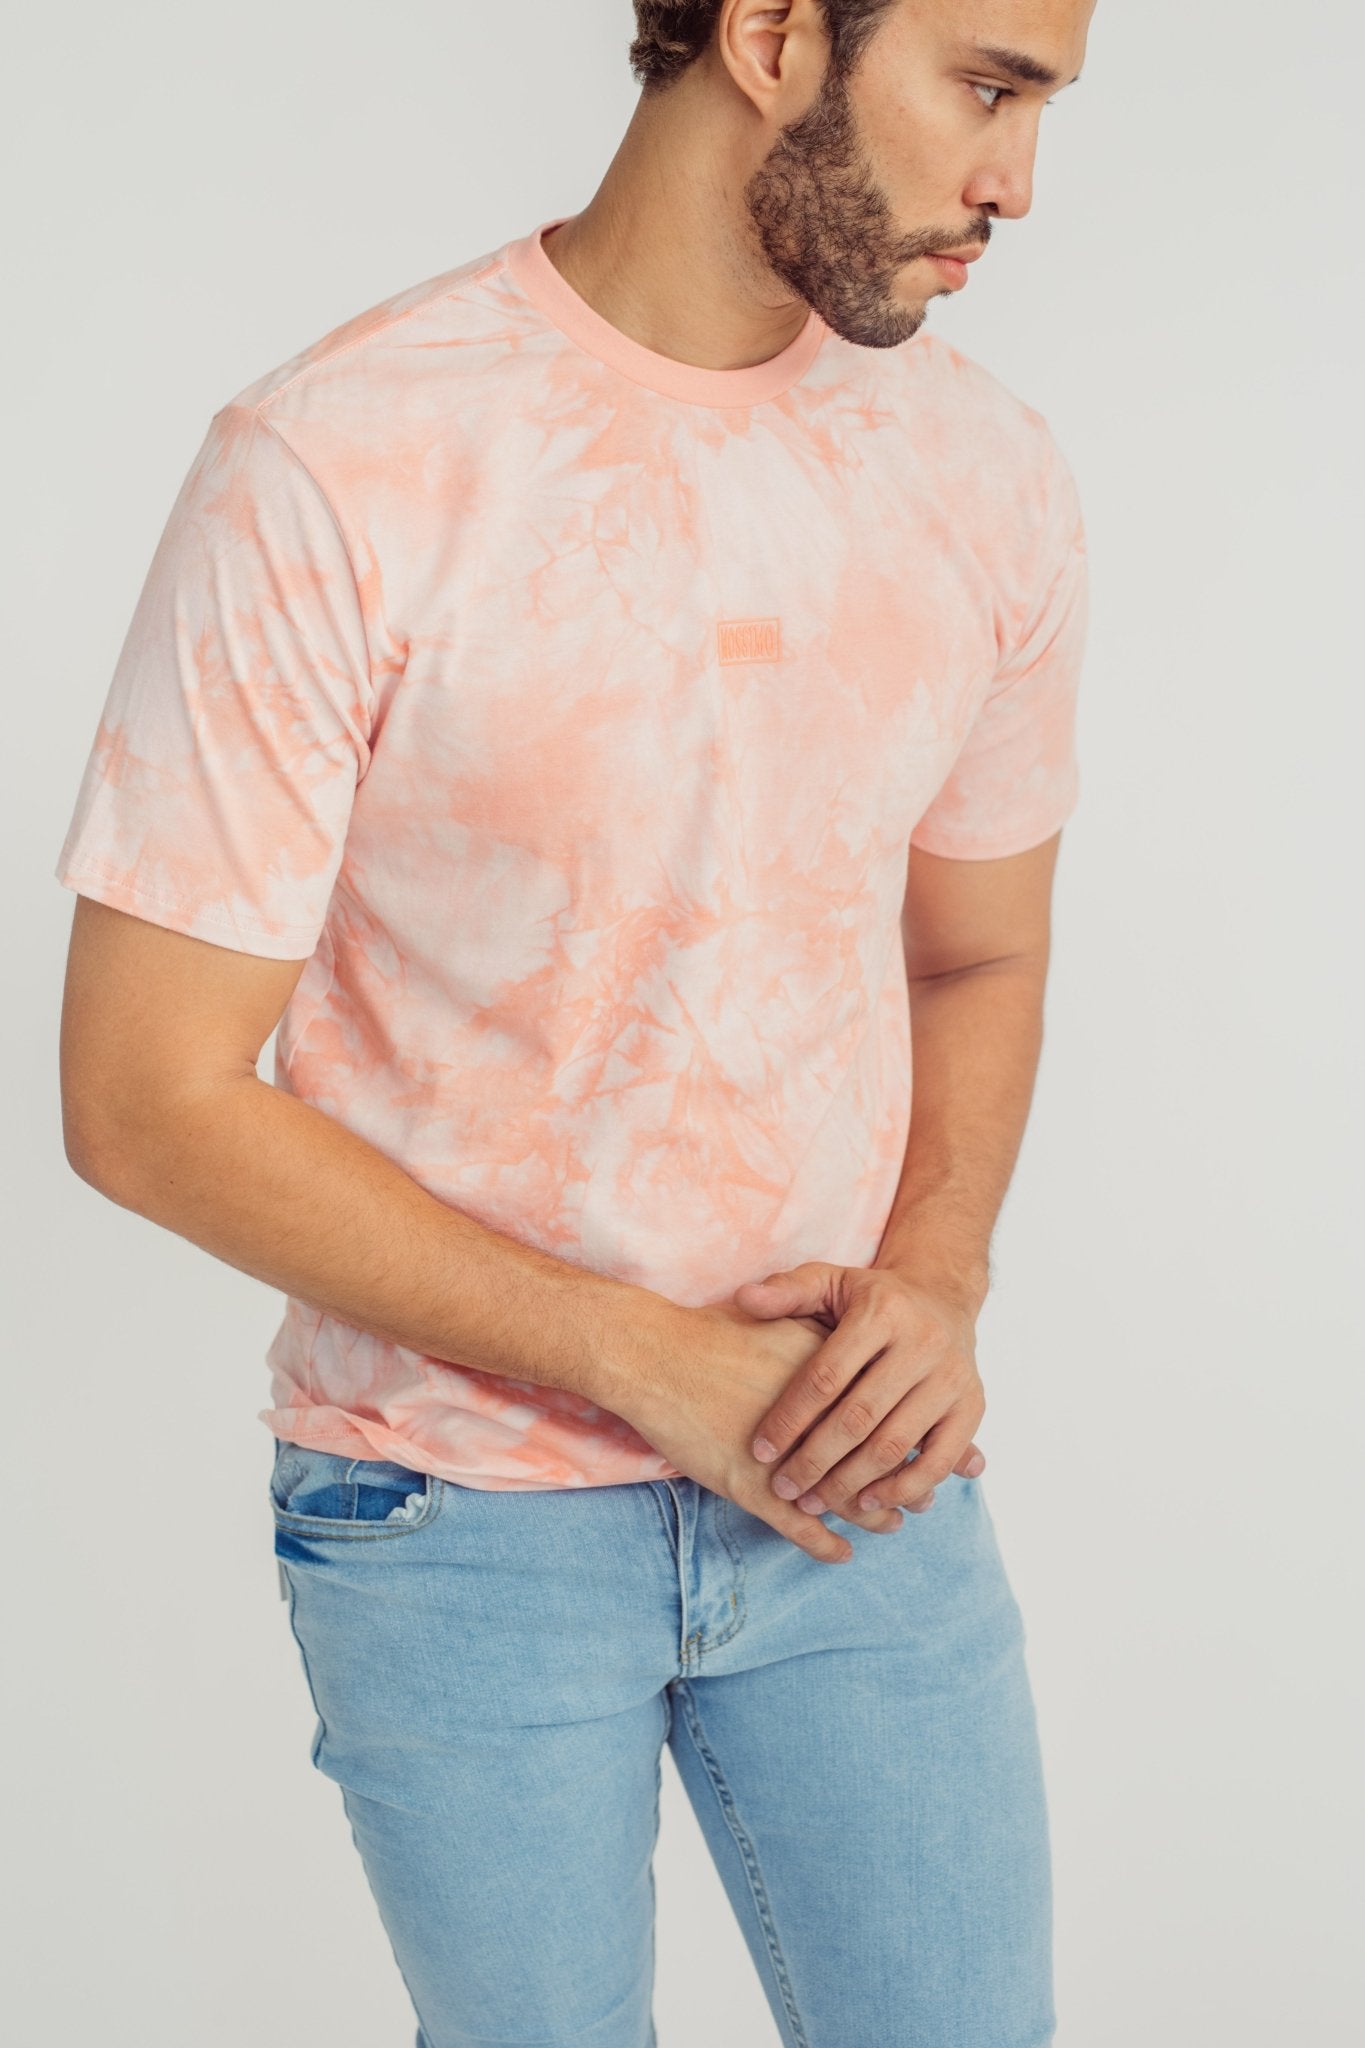 Round Neck Tie Dye with High Density Print Comfort Fit Tee - Mossimo PH